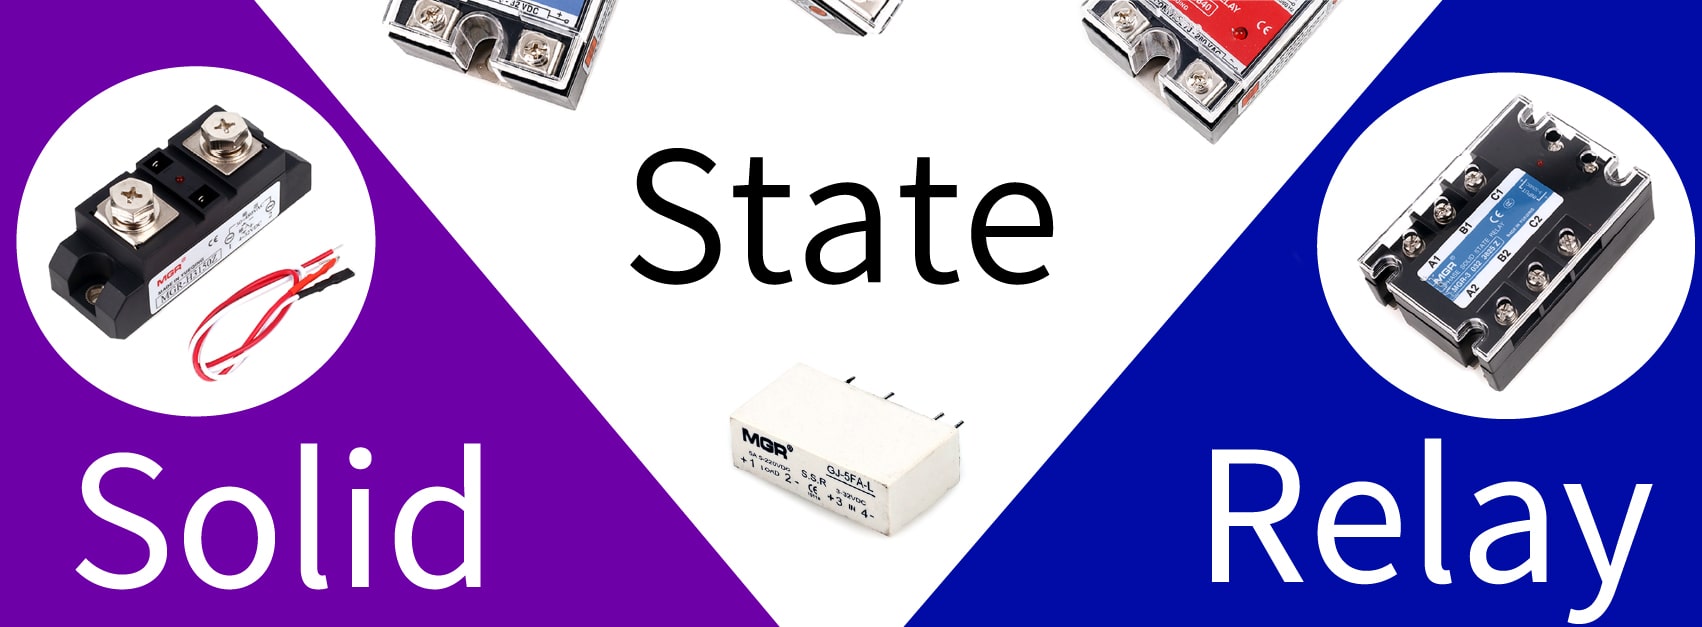 Three types of the solid state relay